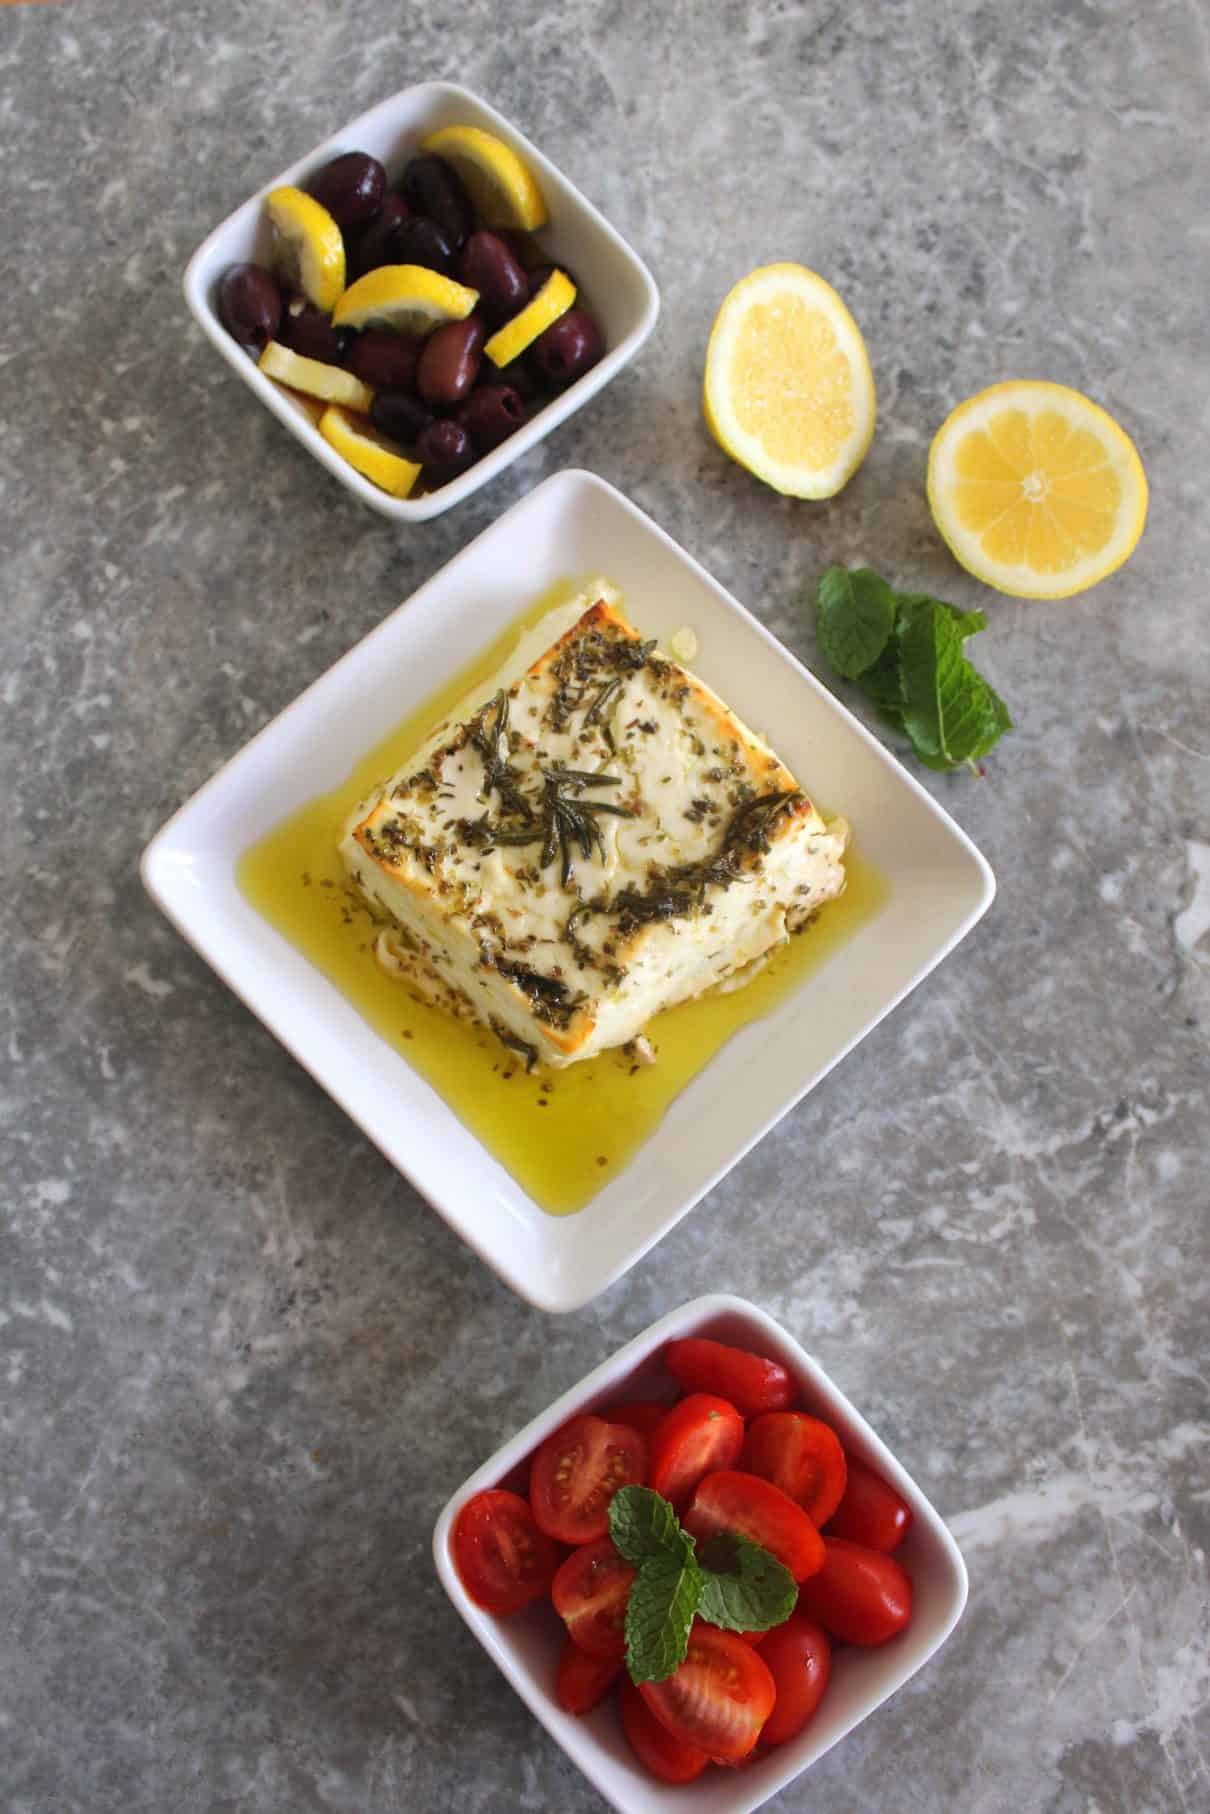 A set of appetizers: from top to bottom you see a dish with kalamata olives and lemon, then baked feta cheese with herbs and lastly grape tomatoes garnished with mint. Next to the 3 sides dishes there's lemon slices and mint leaves too.